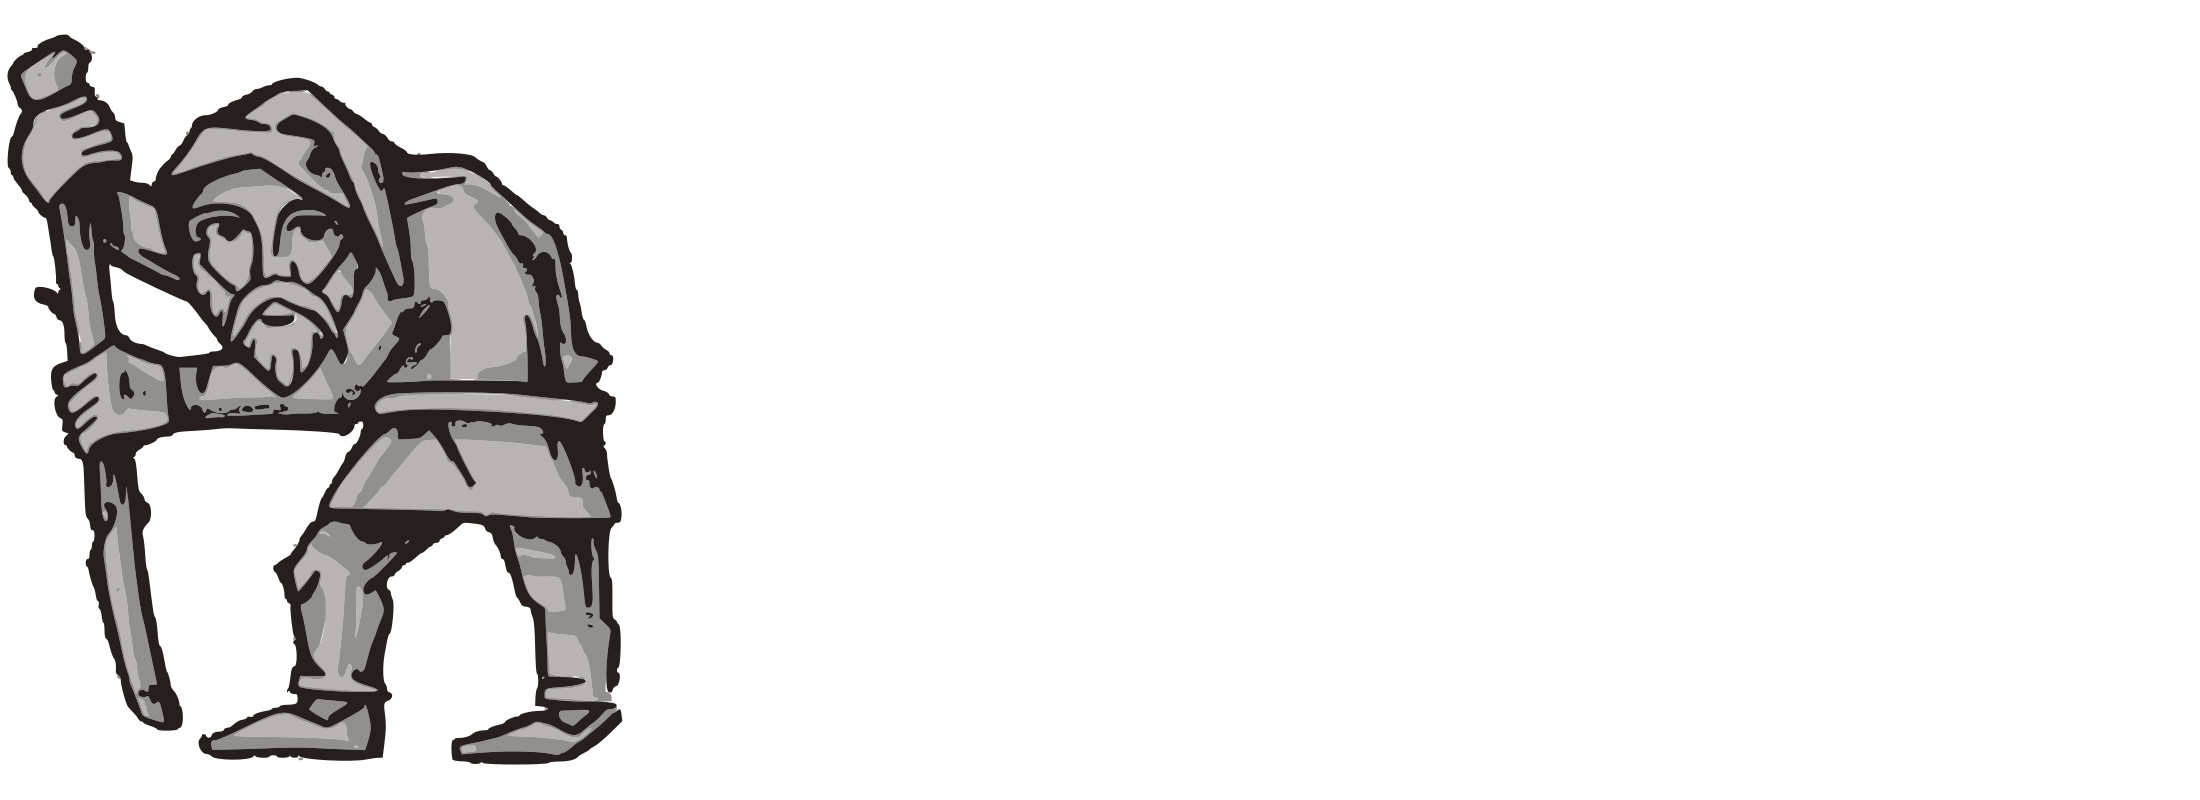 Storia Svelata - Historical and Genealogical Research - Publishing Services